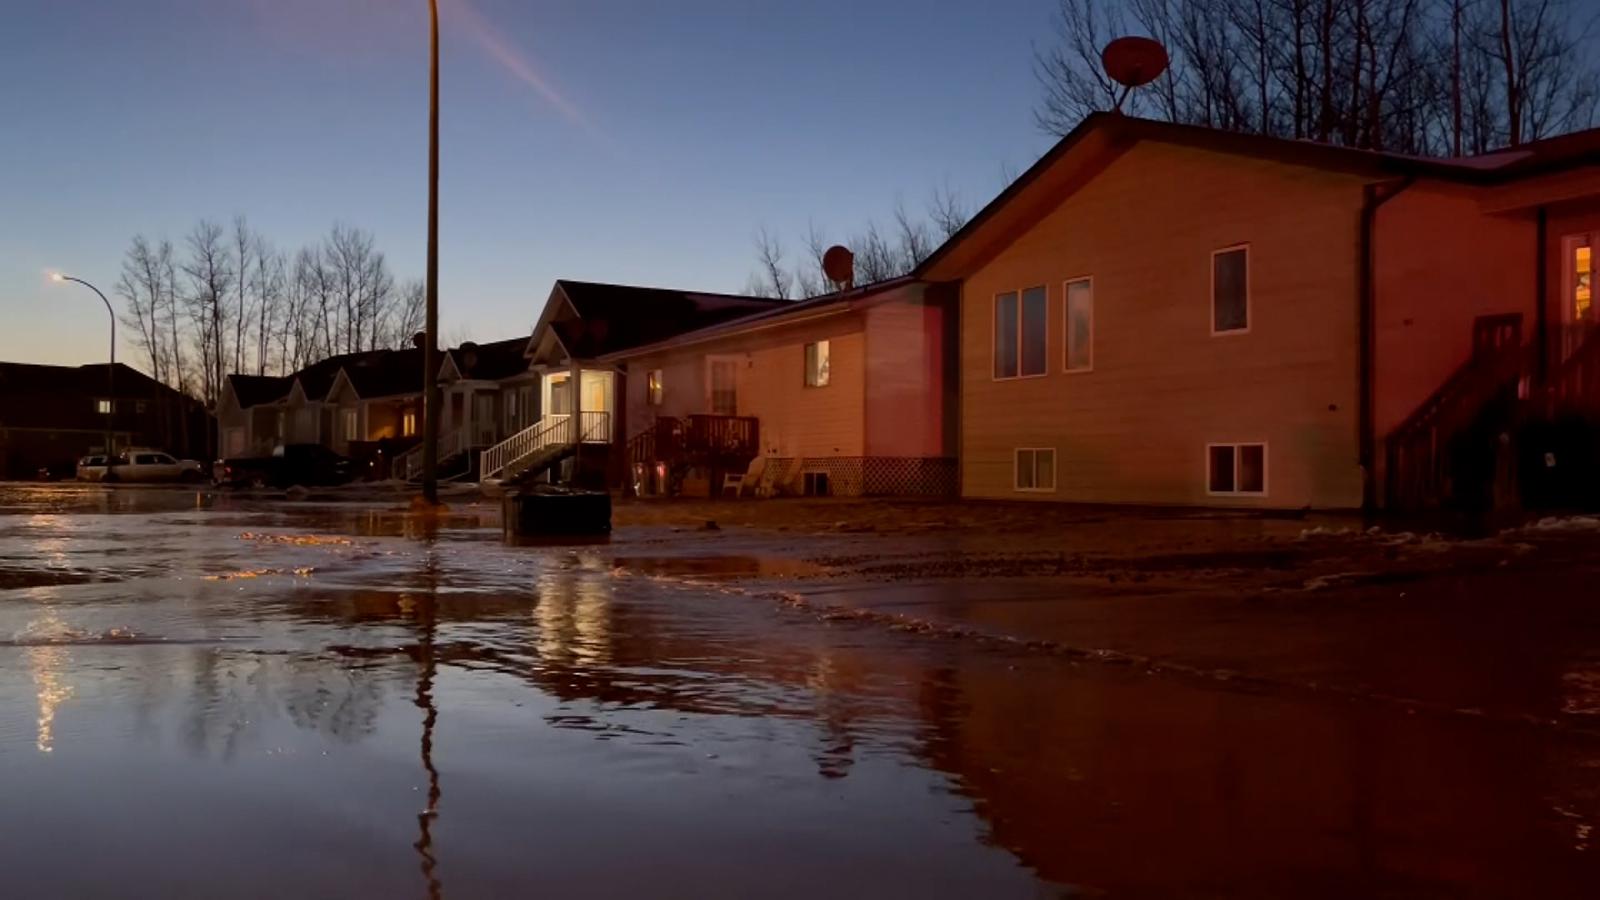 Damage and evacuation caused by massive flooding in Canada